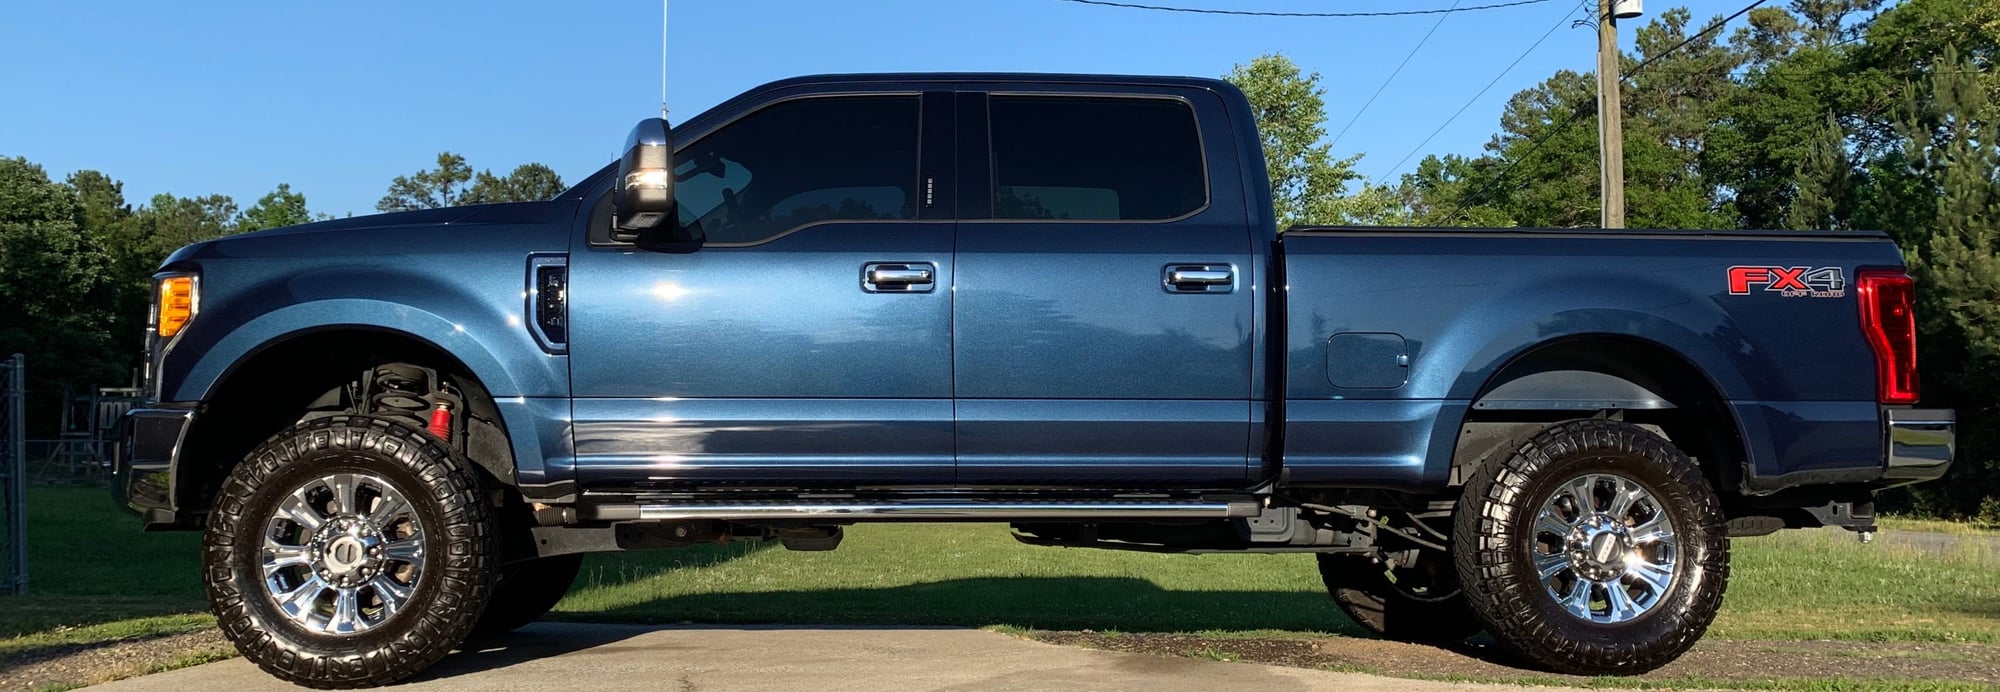 Leveling Kit - Ford Truck Enthusiasts Forums